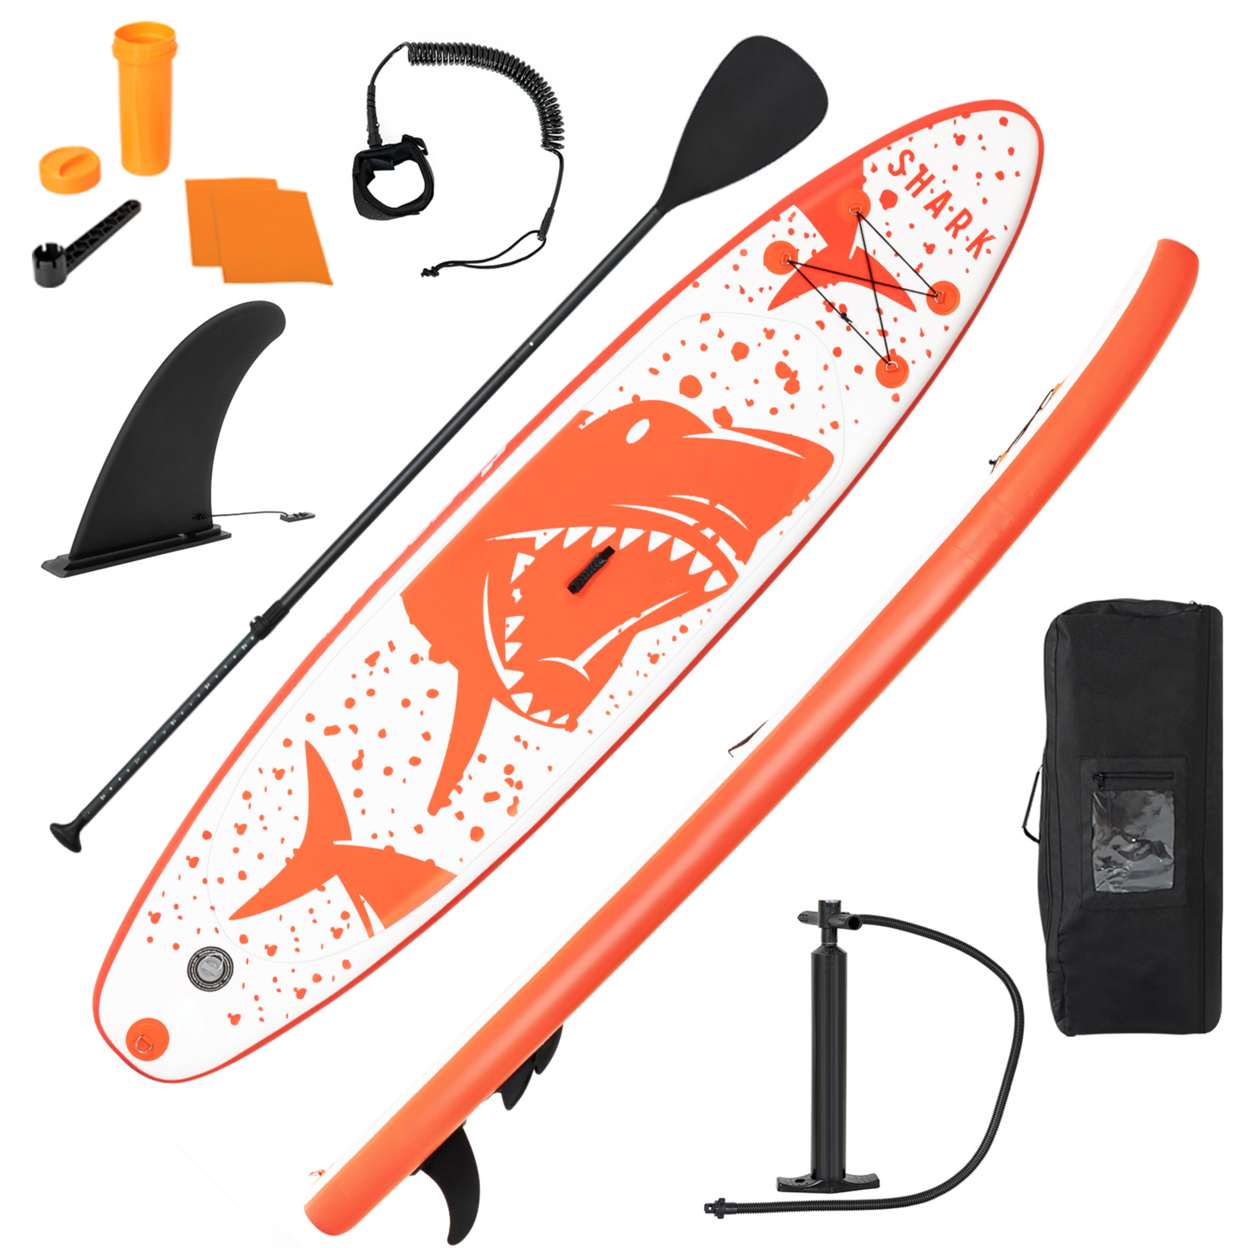 10' Inflatable Stand-Up Paddle Board Non-Slip Deck Surfboard W/ Hand Pump